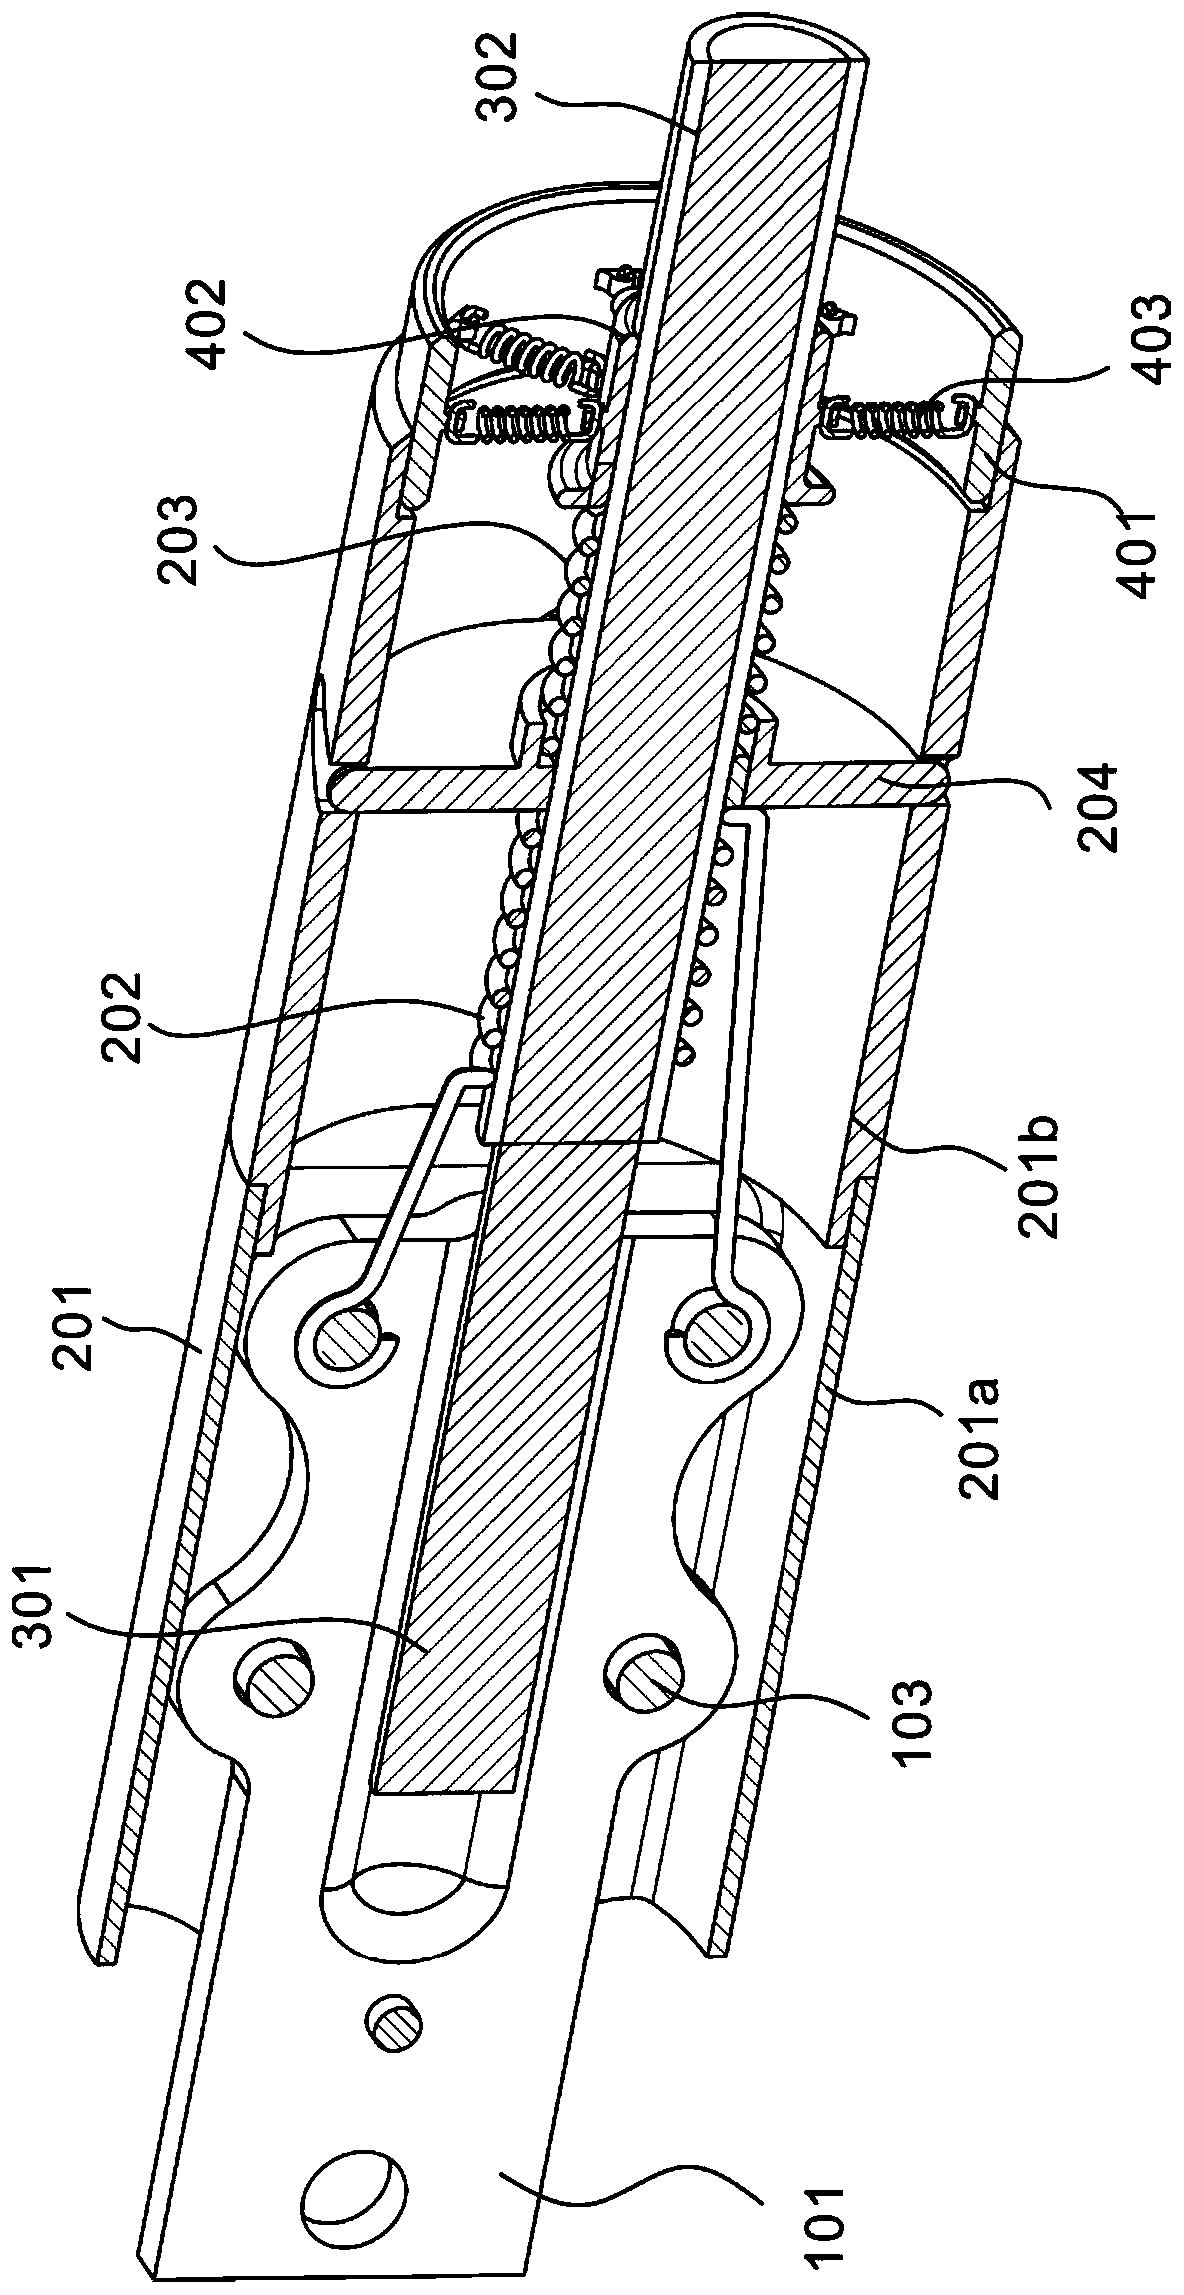 Equipment wire clamp anti-breaking device